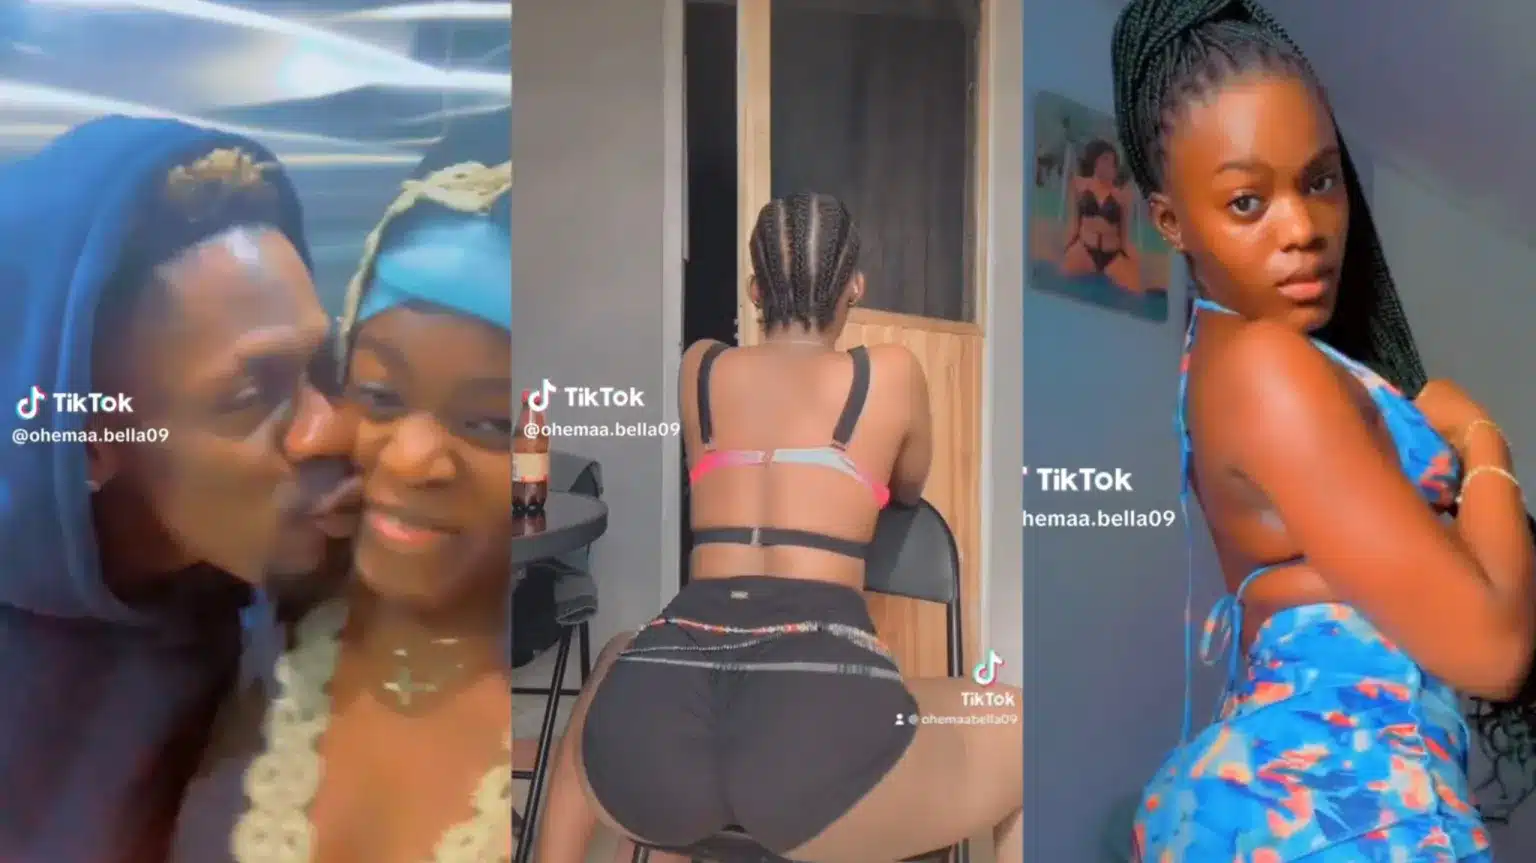 “Trouble in Maali”: Shatta Wale caught kissing TikTok Slay Queen who enjoys “bedroom toys” – Video